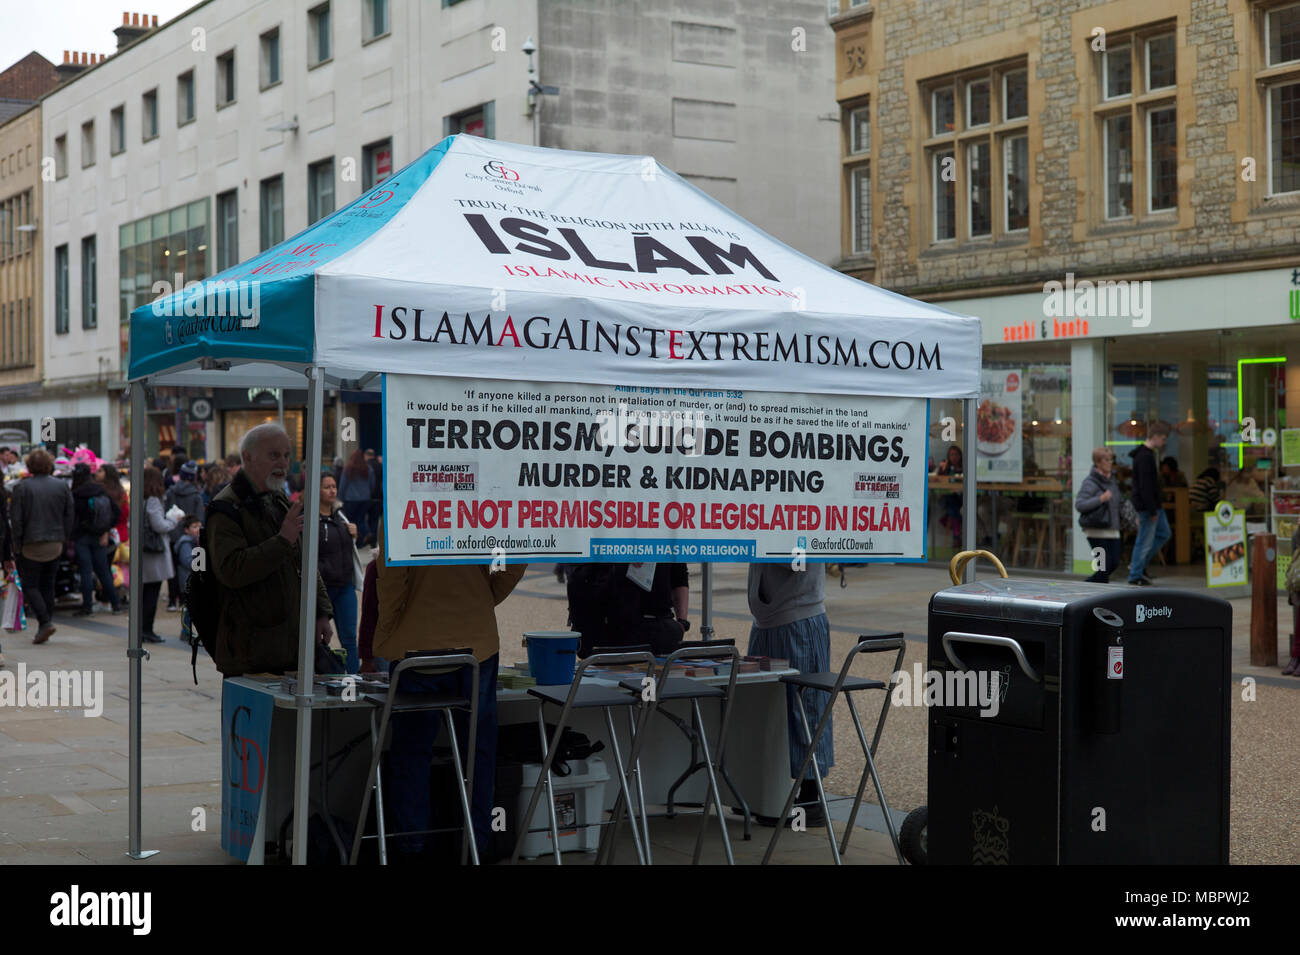 Islam Against Extremism information in Oxford Stock Photo